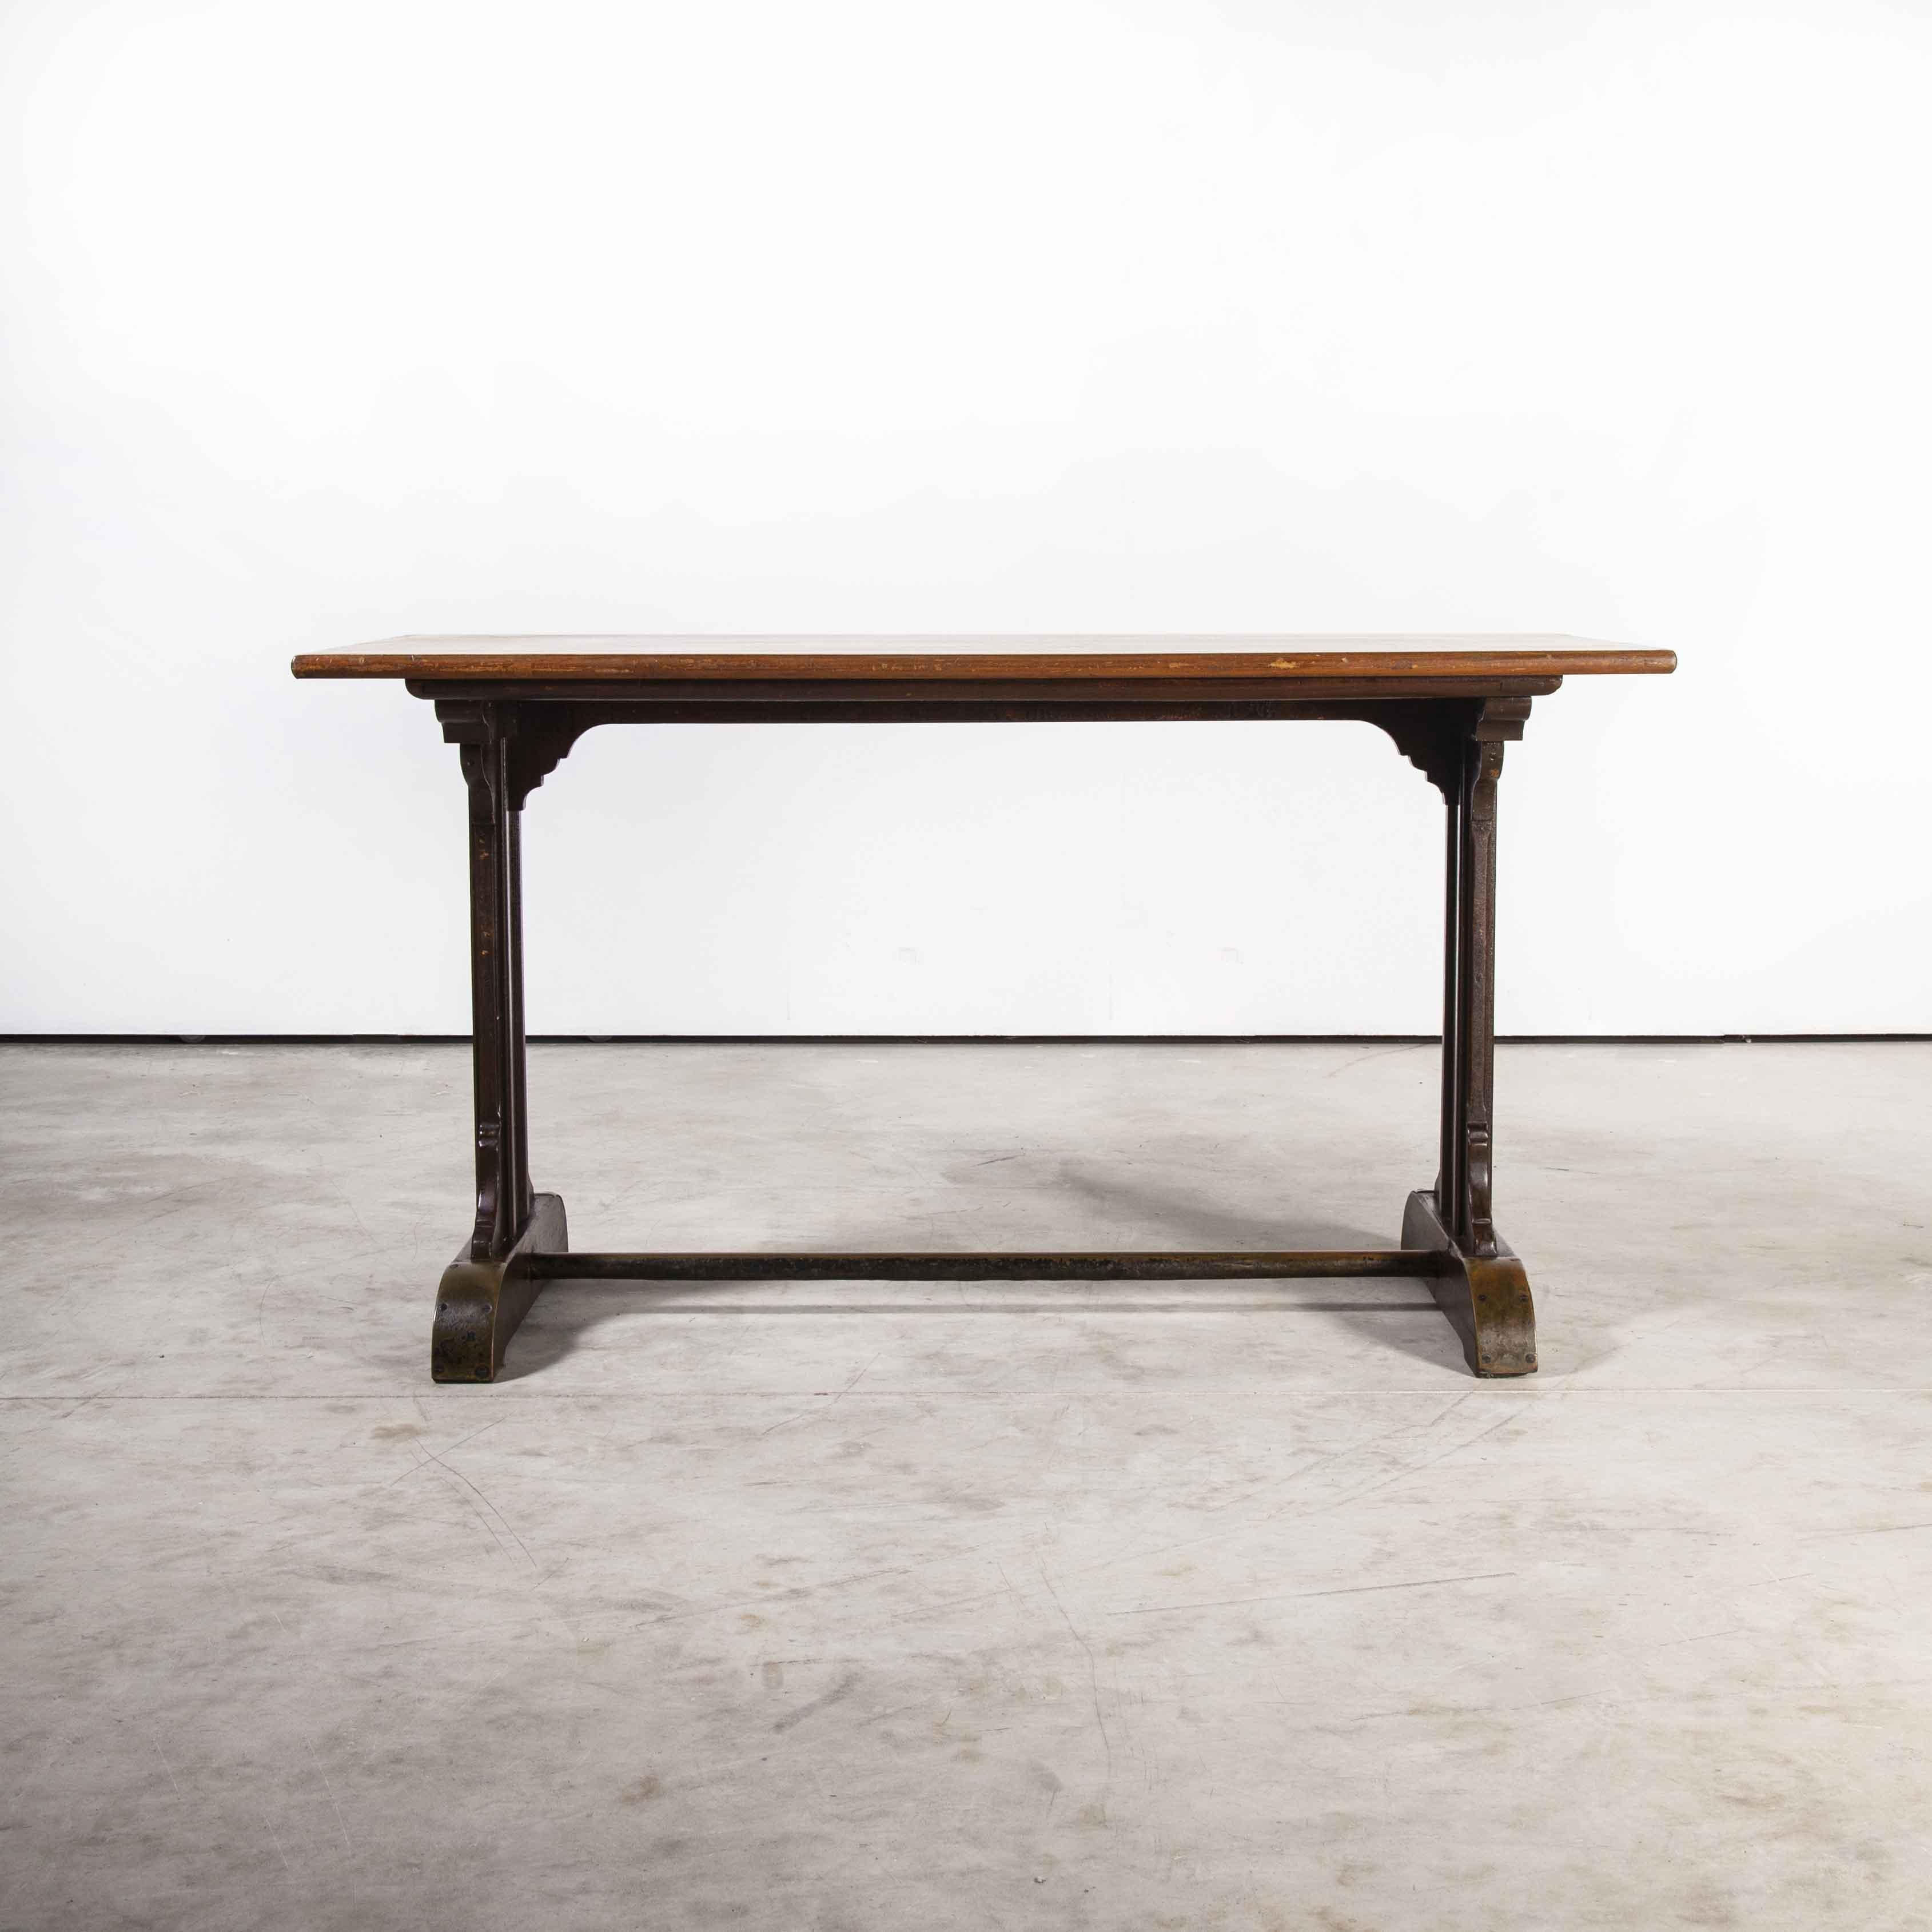 1930's Original French Café Table, Rectangular Dining Table 'Model 1114.1' For Sale 6